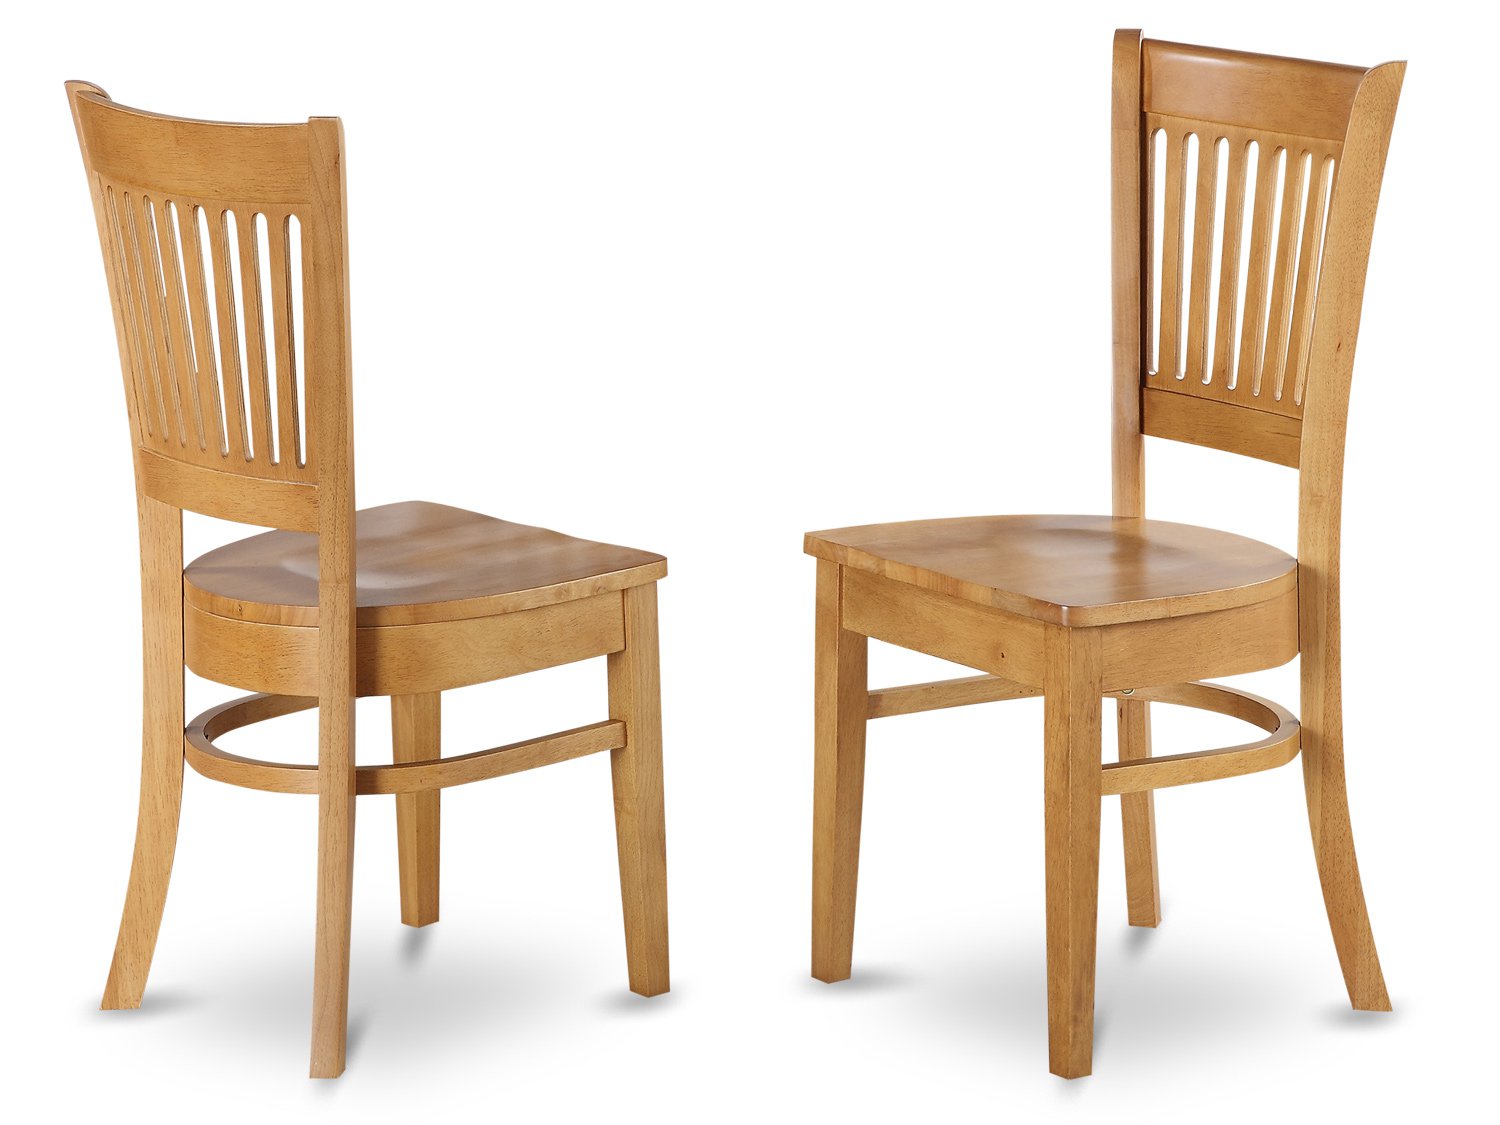 Wooden Dining Room Chairs Set Of 6